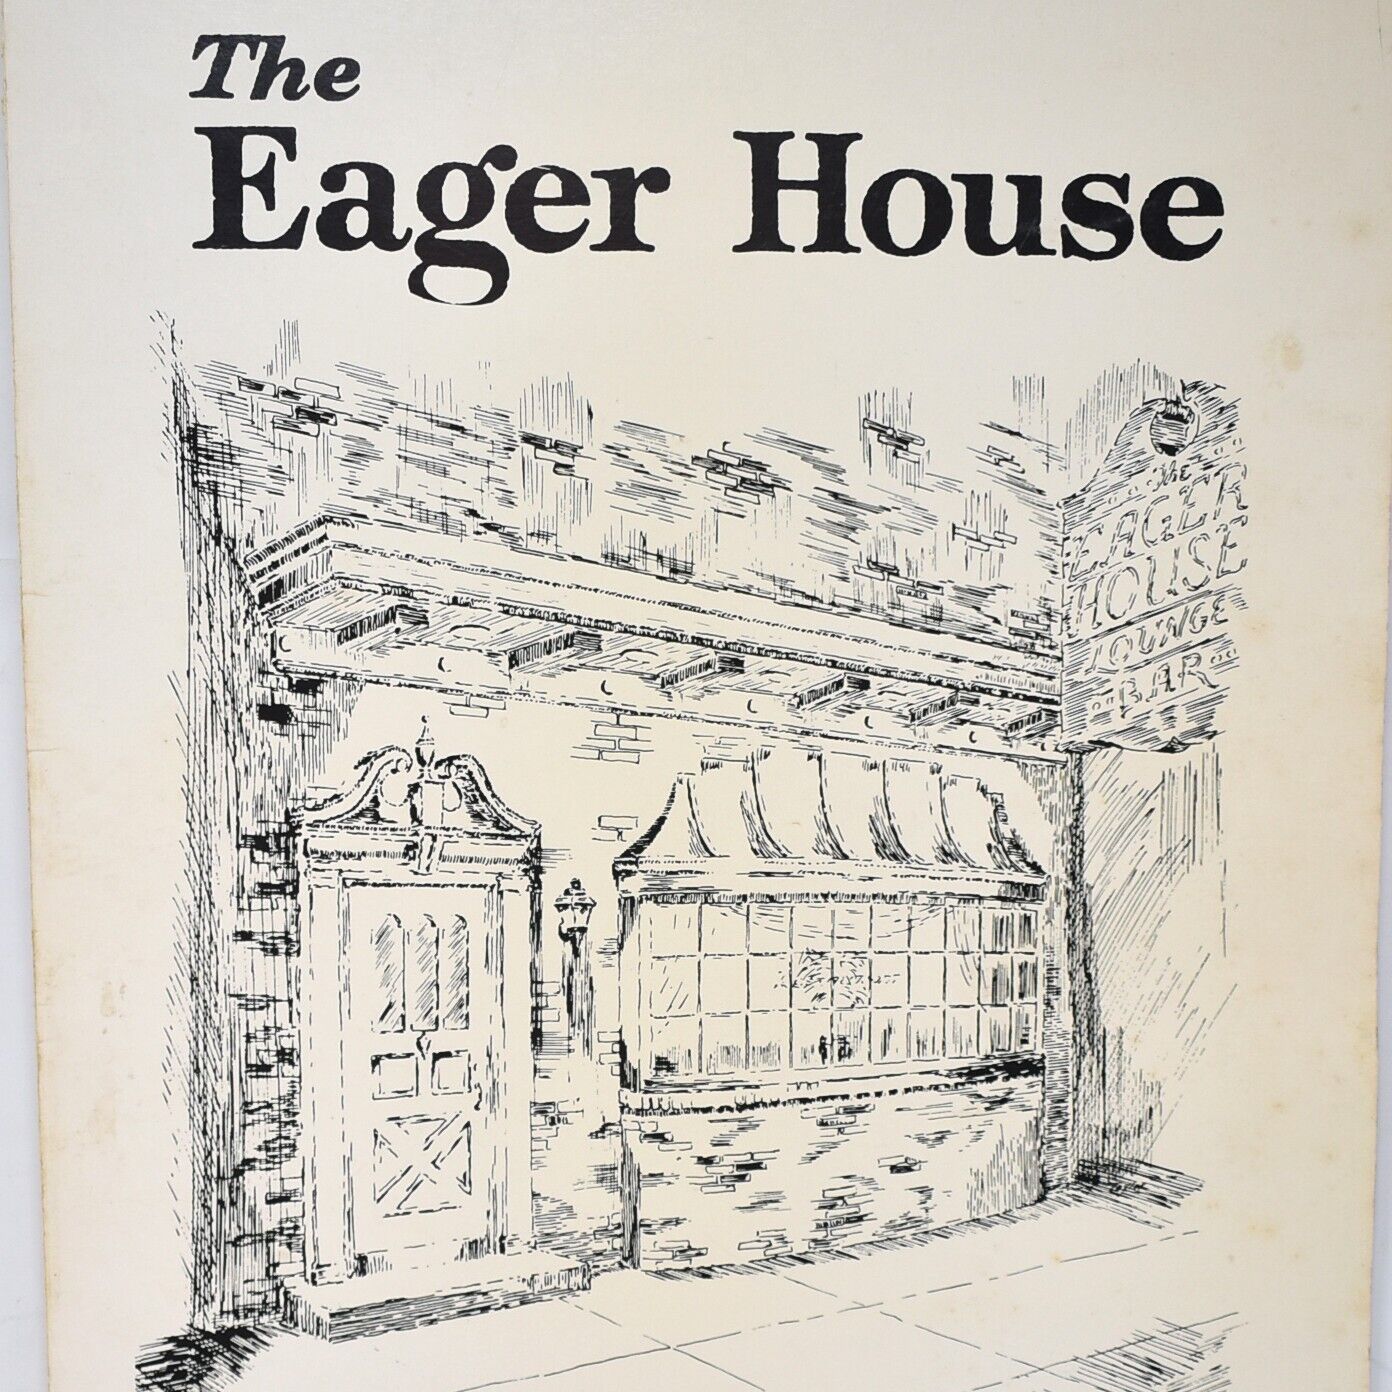 1960 The Eager House Restaurant Menu 13–15 West Eager Street Baltimore Maryland